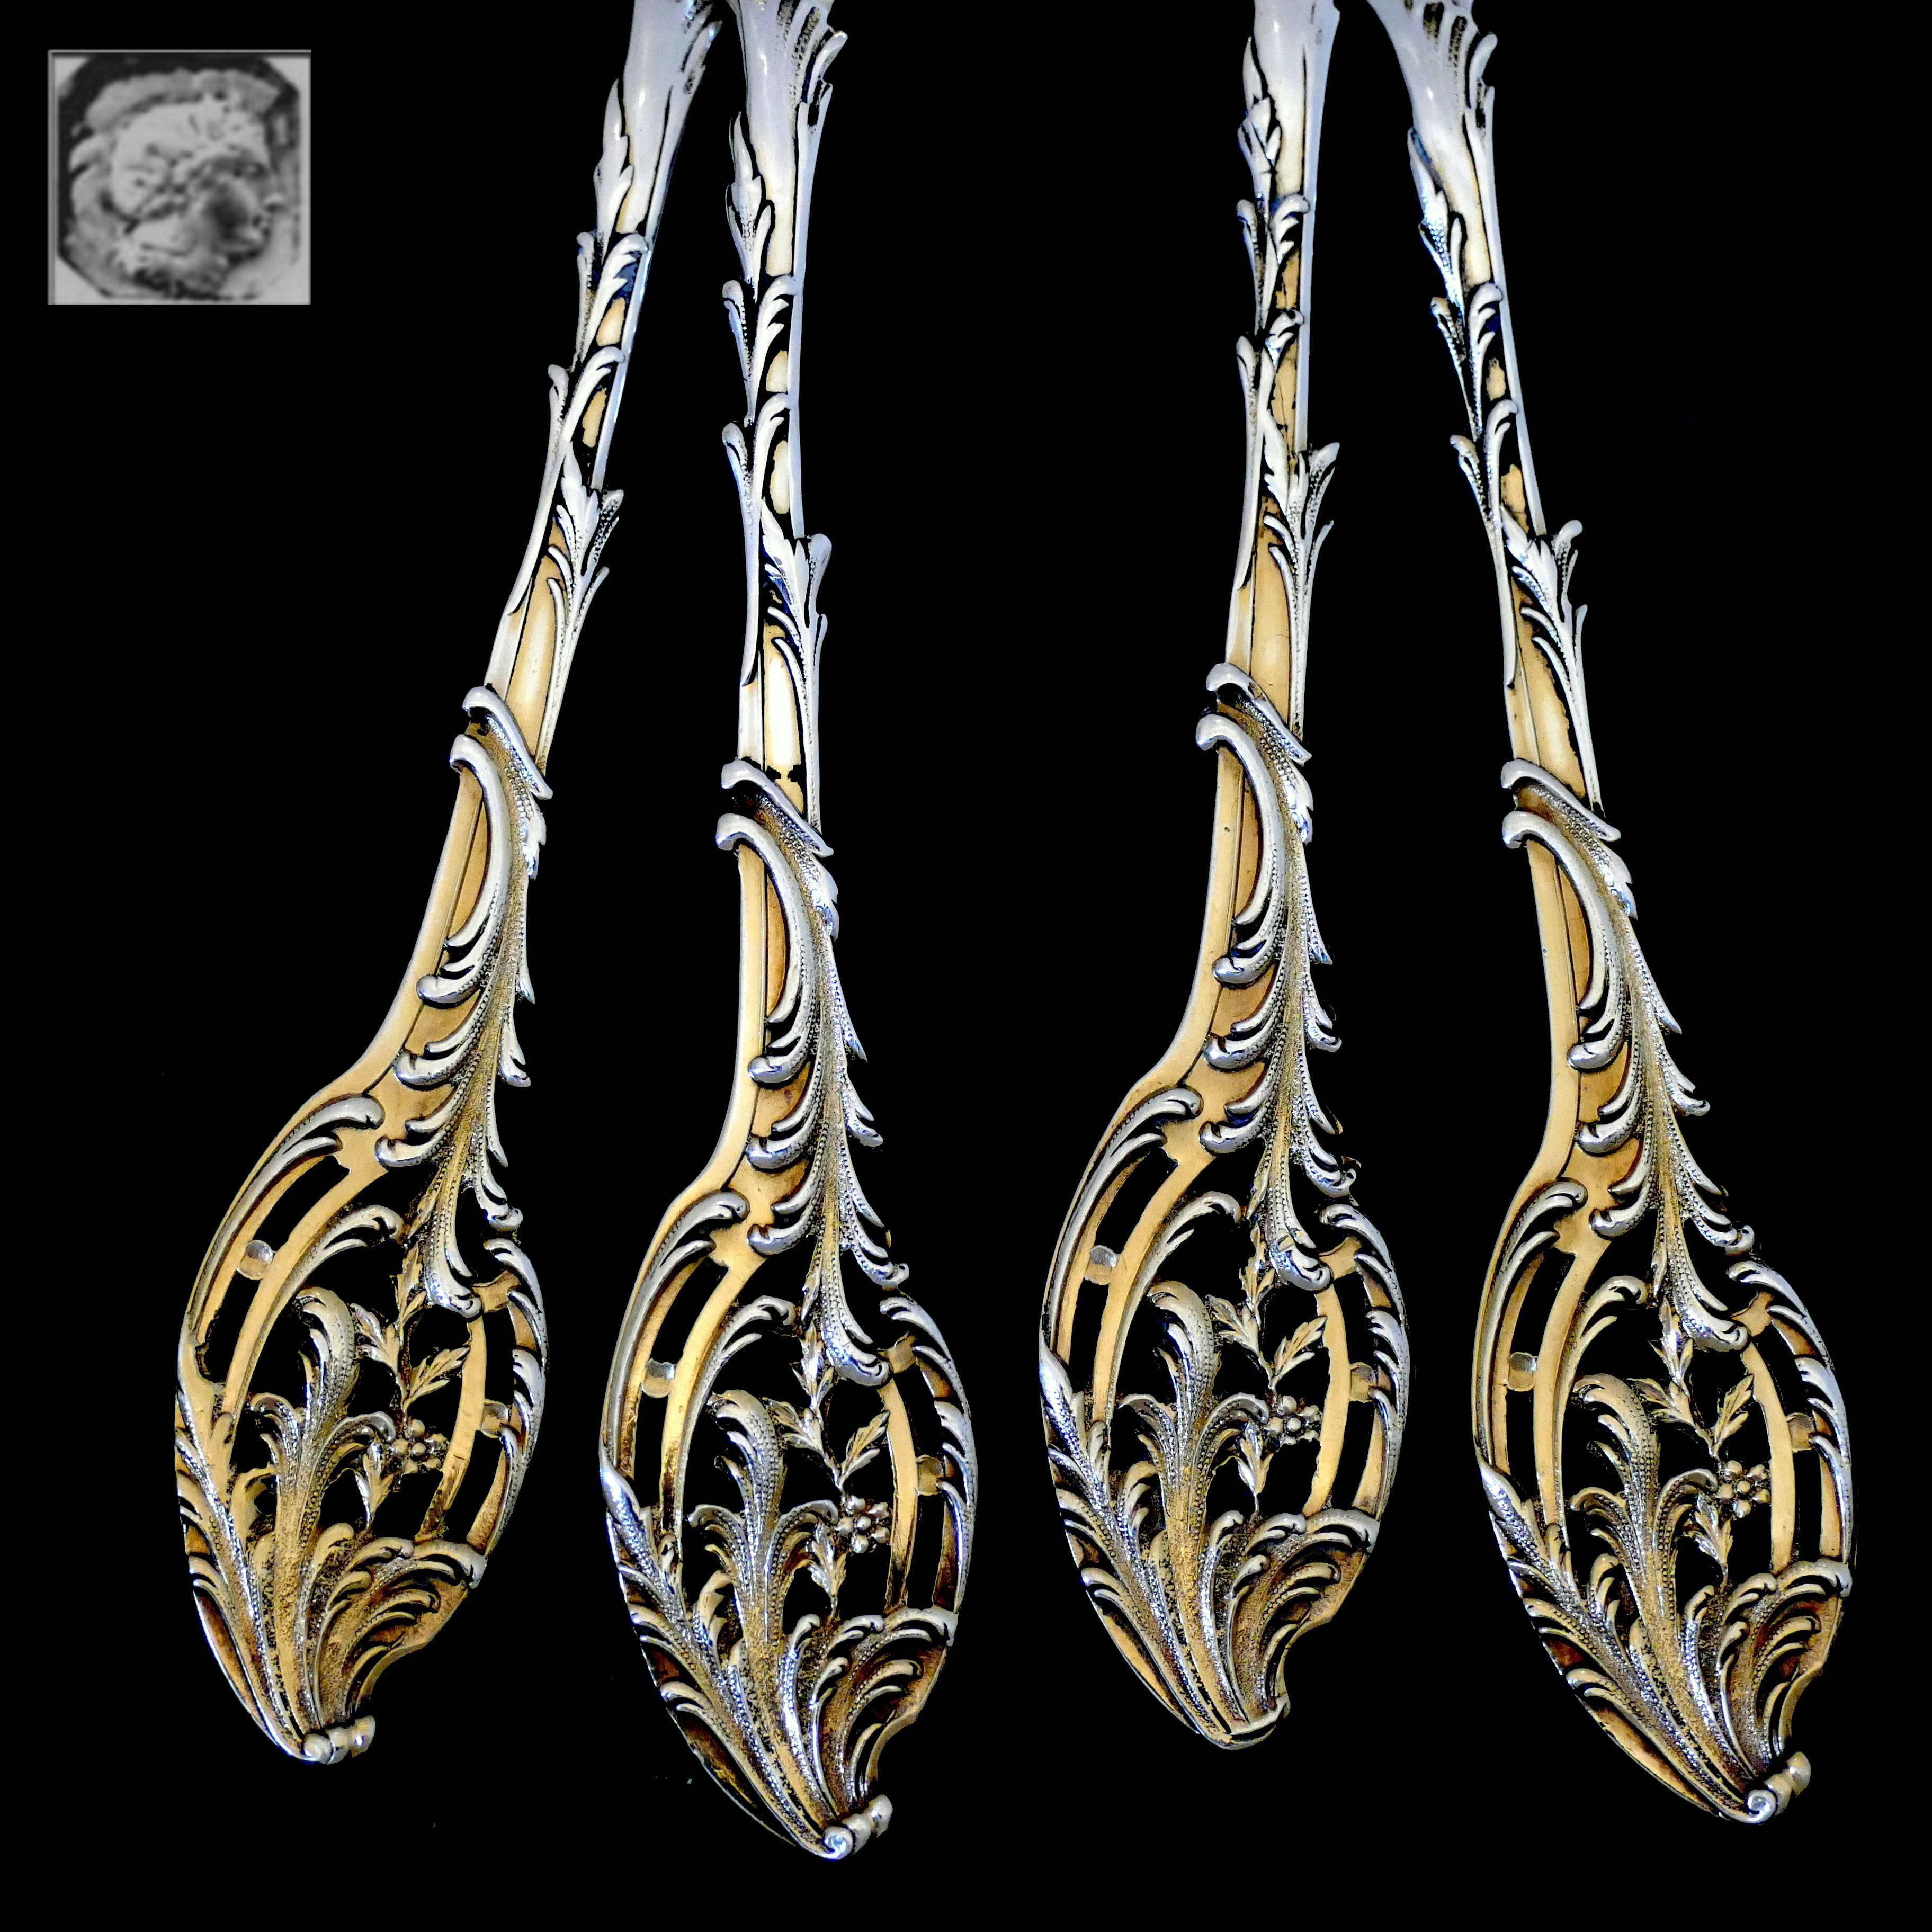 Late 19th Century Ernie French Sterling Silver 18-Karat Gold Dessert Hors D'oeuvre Set of 4 Piece